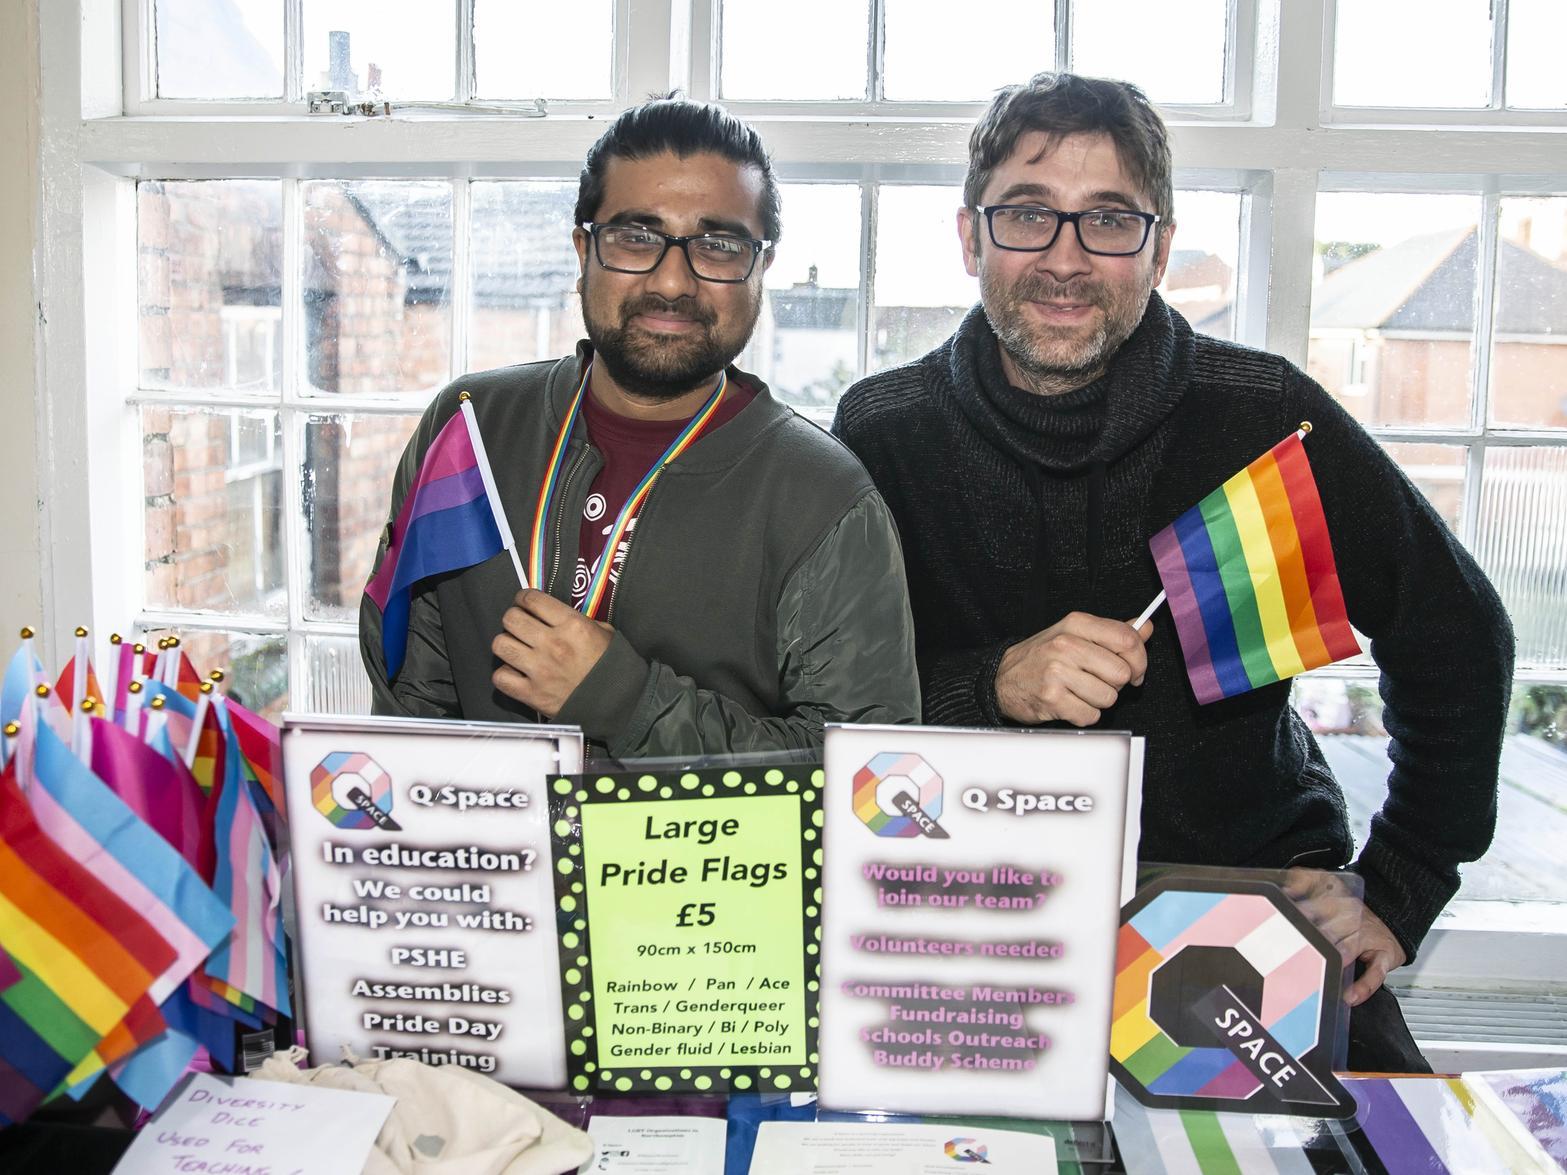 Q Space had a stall all about the LGBTQ+ community at the African and Caribbean Festival